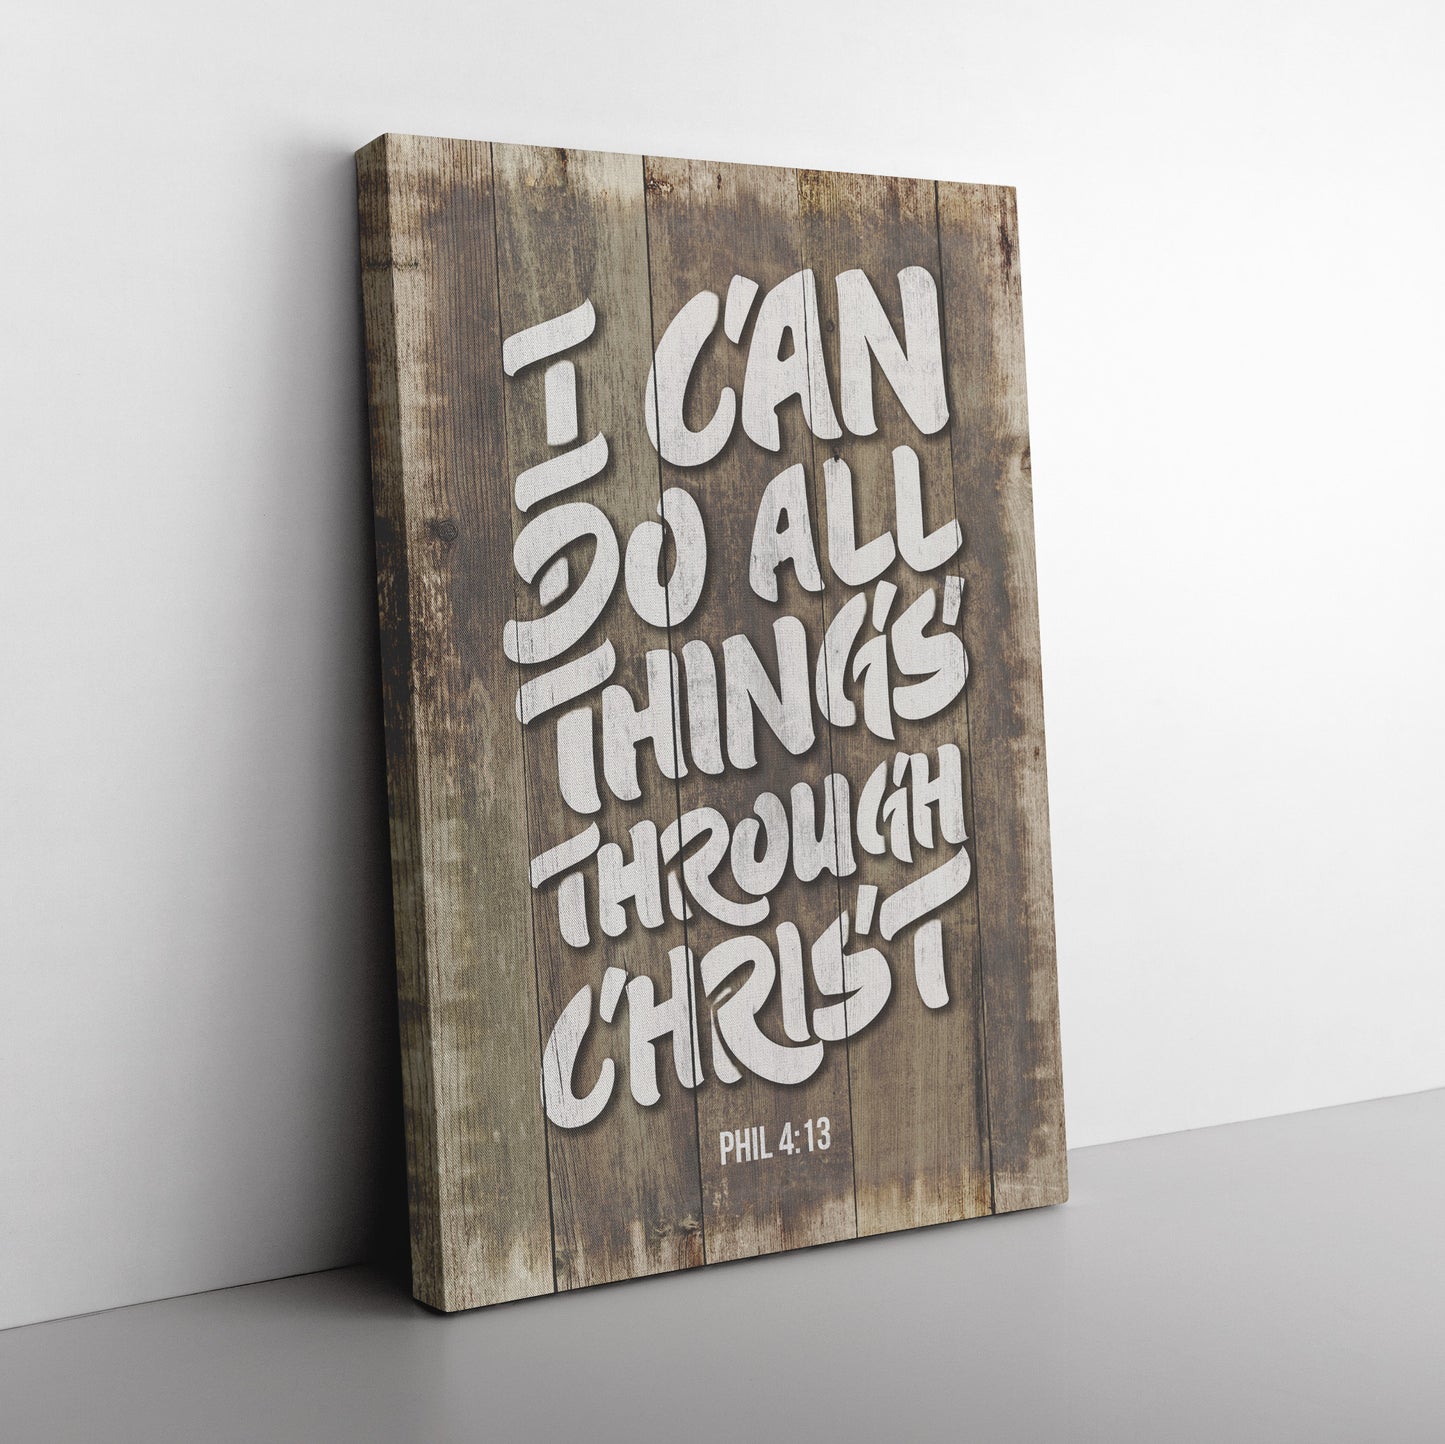 I Can Do All Things Through Christ Who Strengthens Me - Philippians 4:13 Premium Rustic Canvas